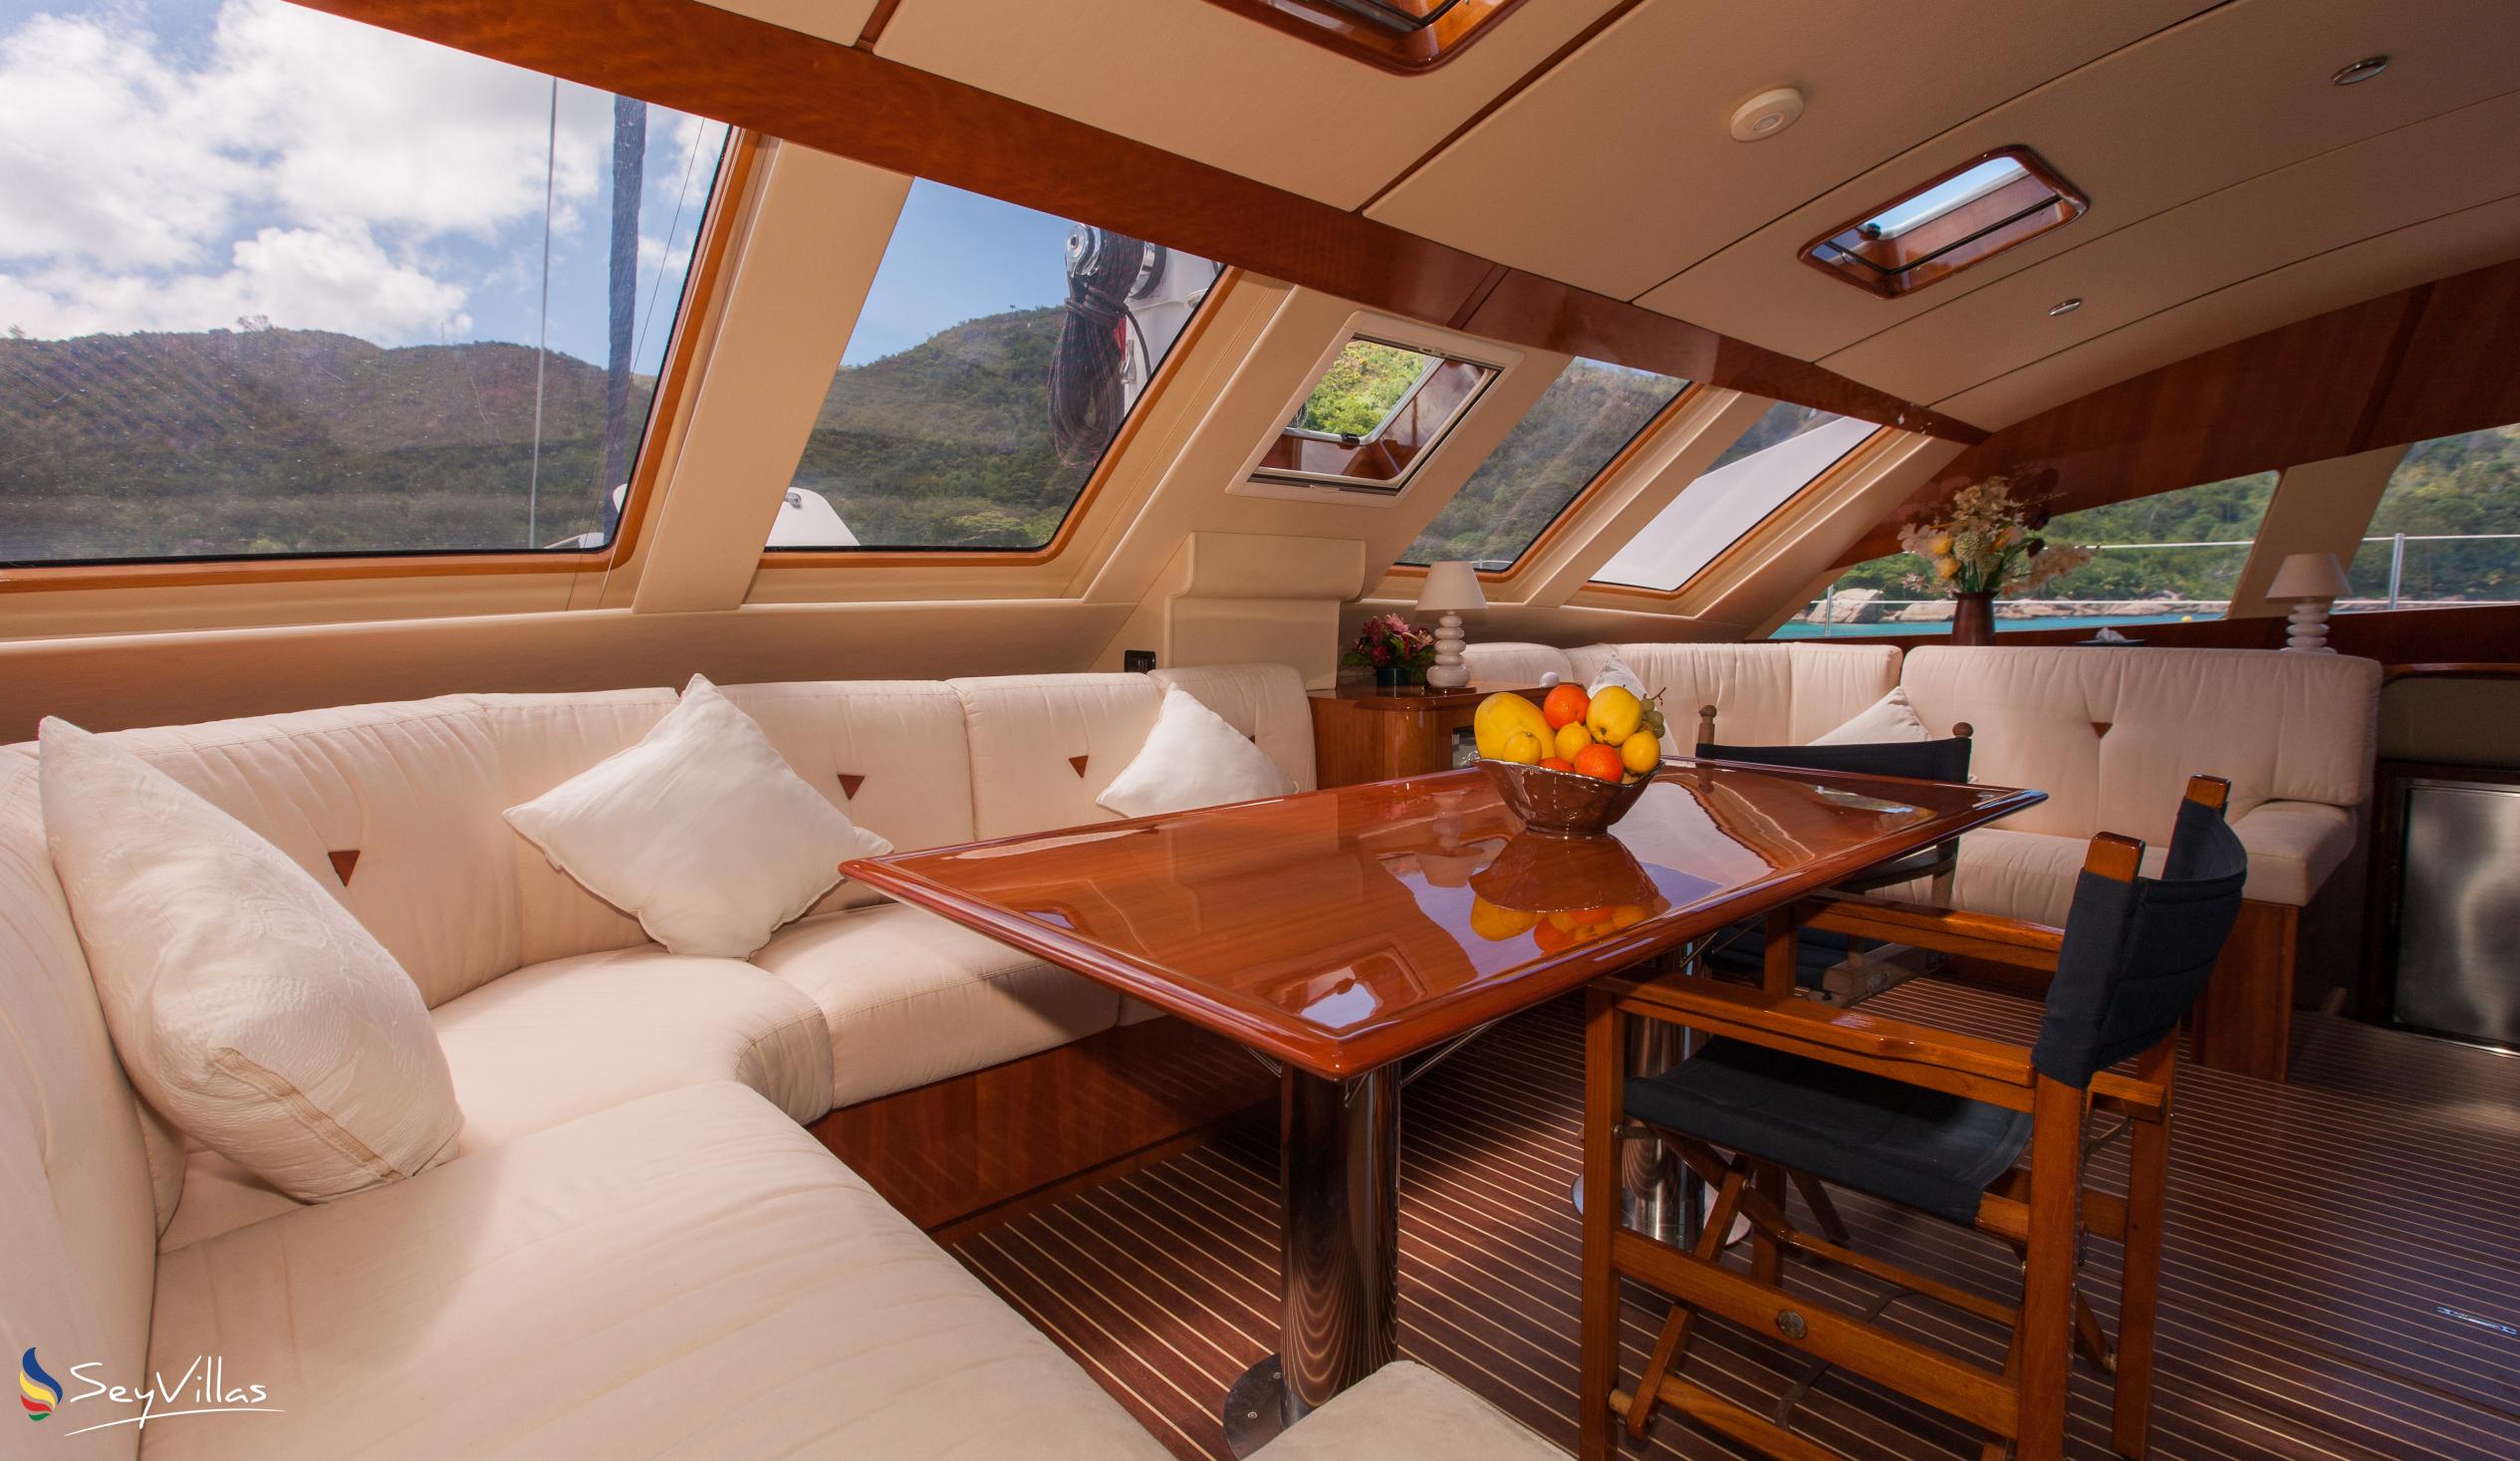 Foto 84: Seyscapes Yacht Charter - Charter completo Cirrus - Seychelles (Seychelles)